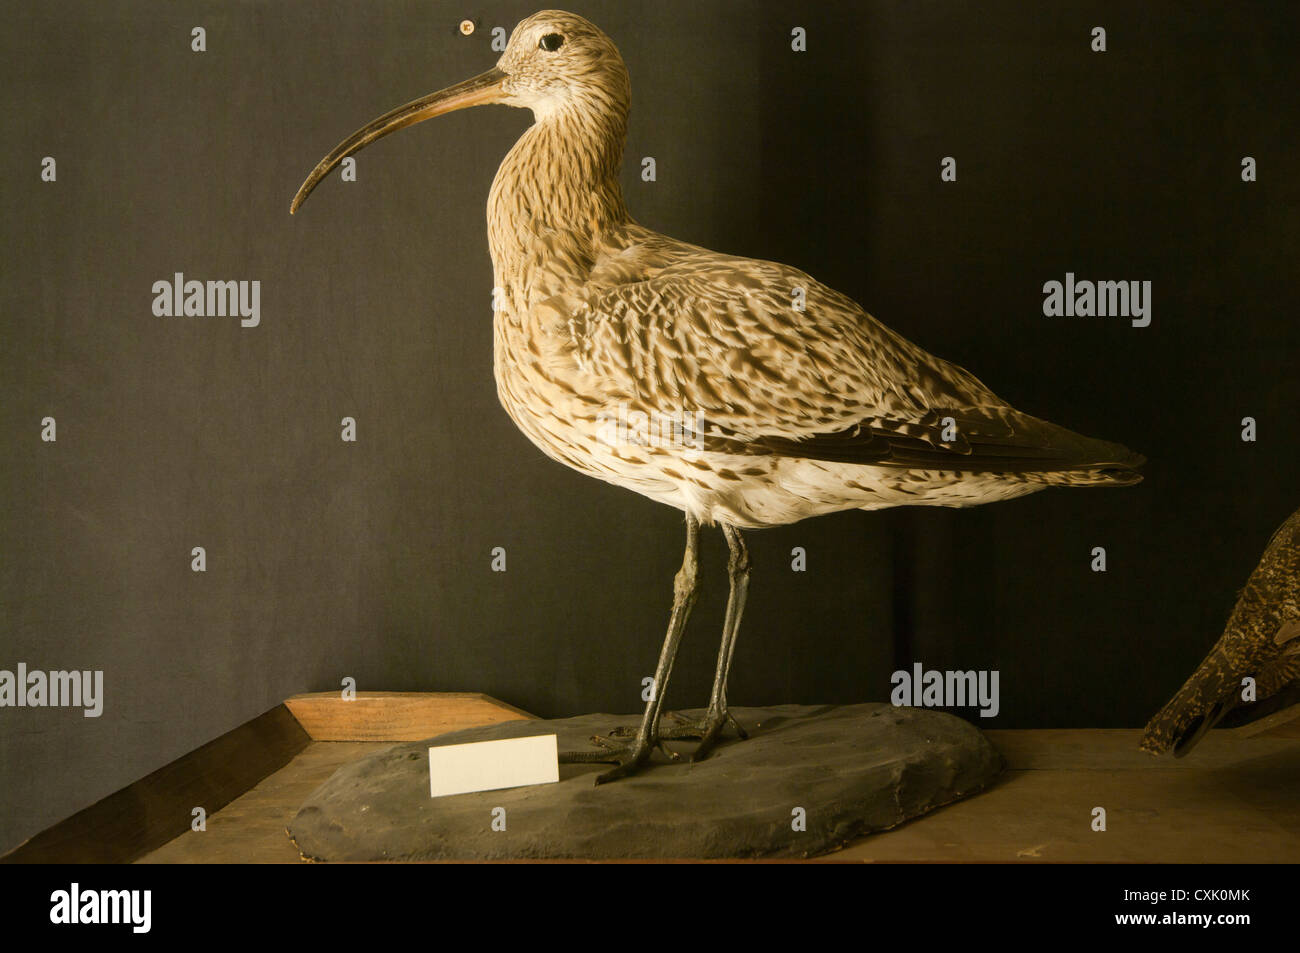 A Stuffed Curlew Taxidermy Stock Photo